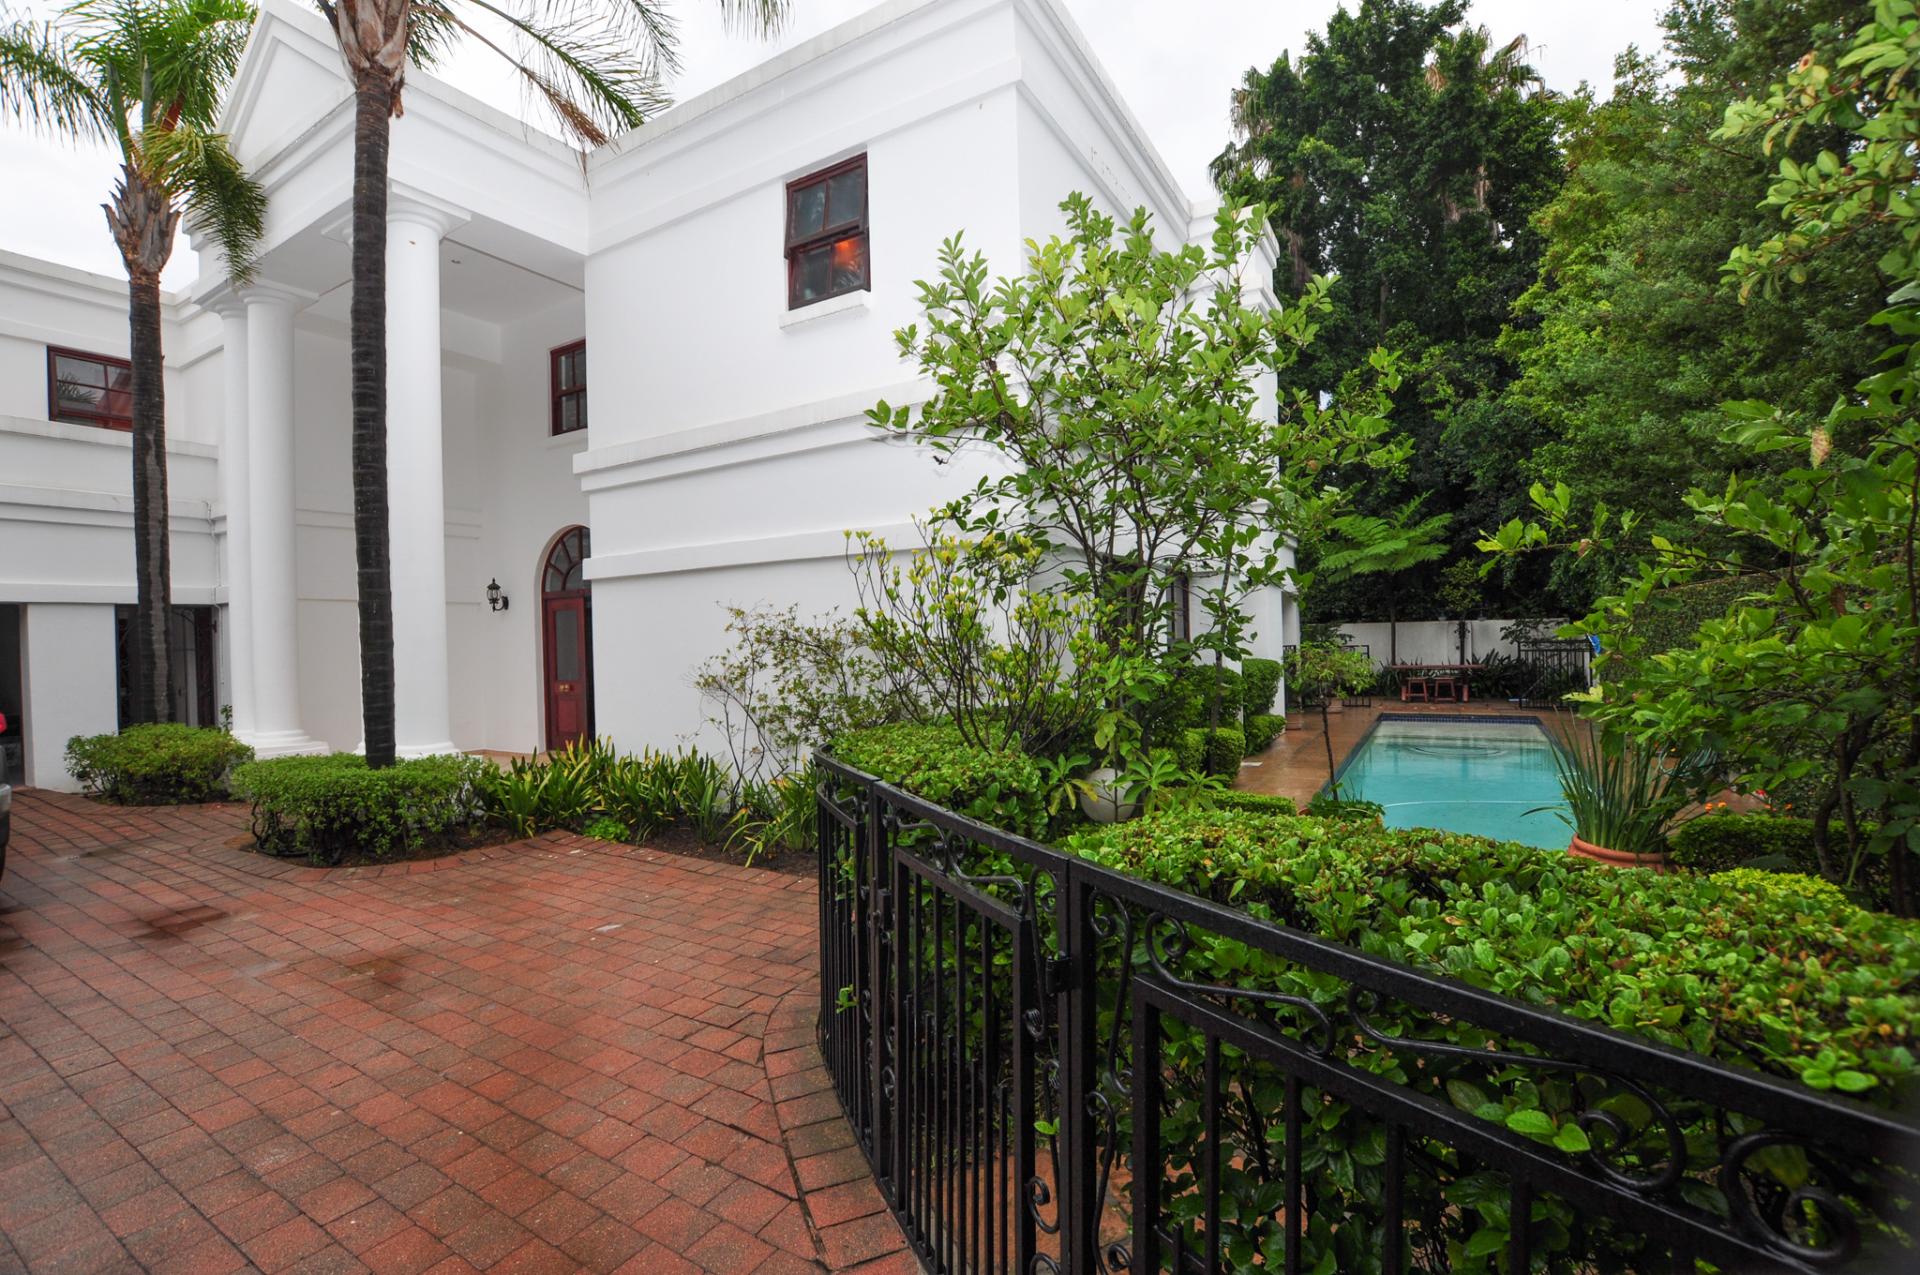 Ultra Modern 3 Bedroom Luxurious Townhouse For Rent in Bryanston